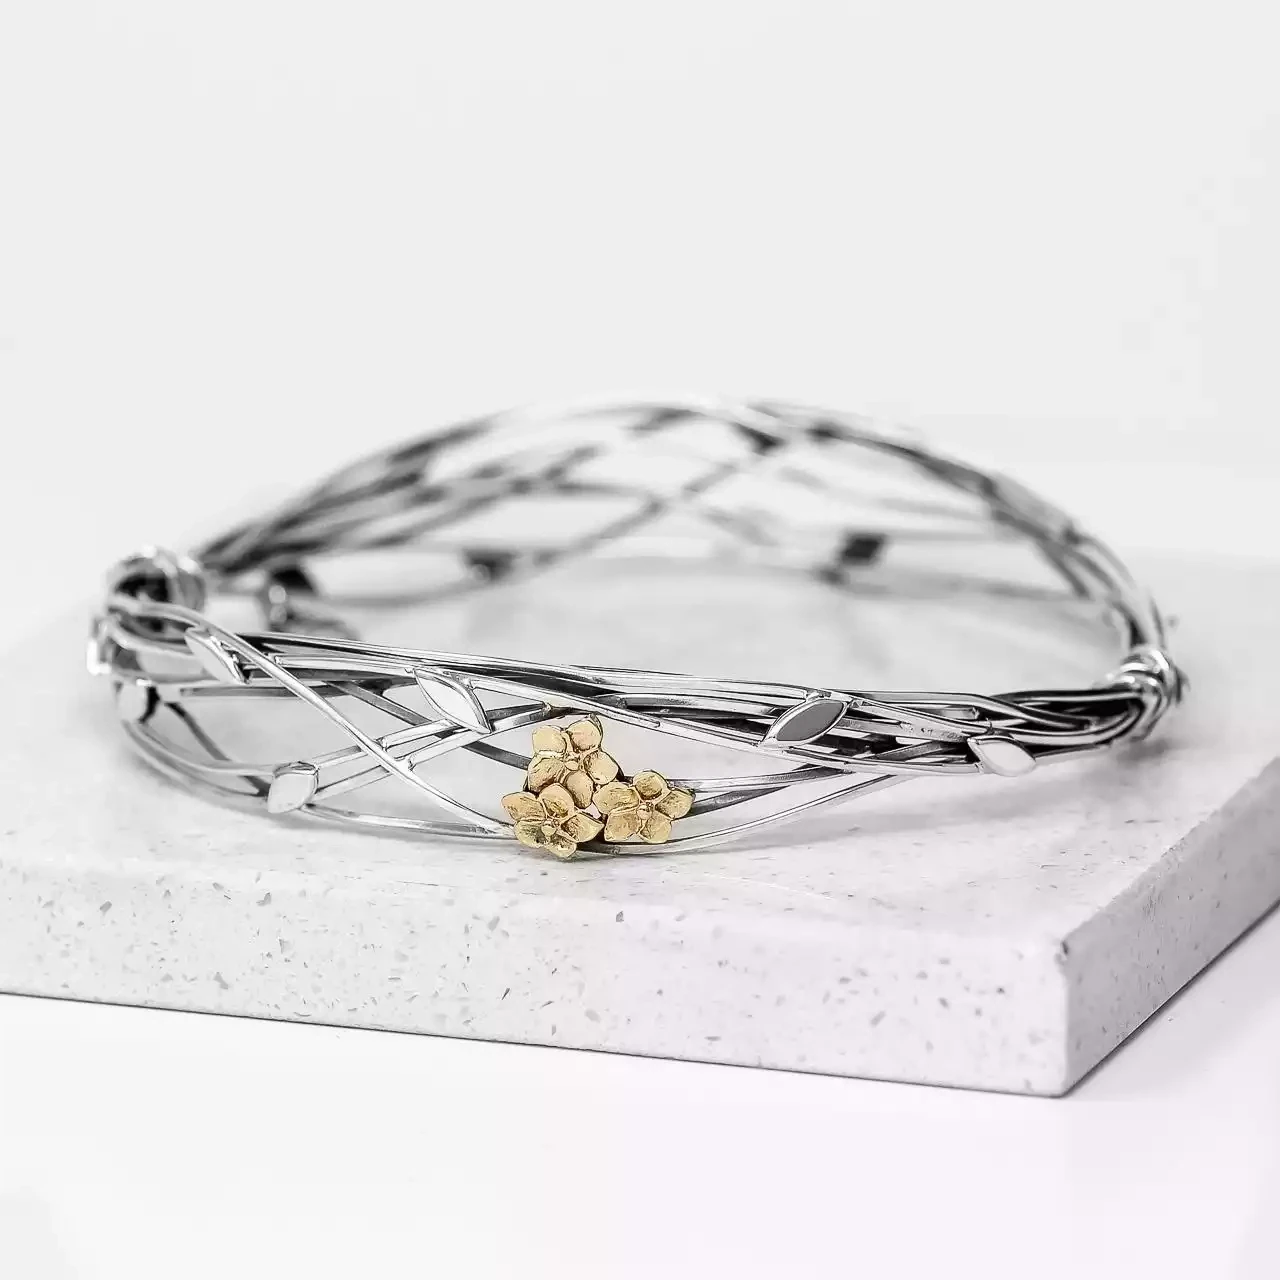 Entwined Silver and Gold Bangle by Linda Macdonald